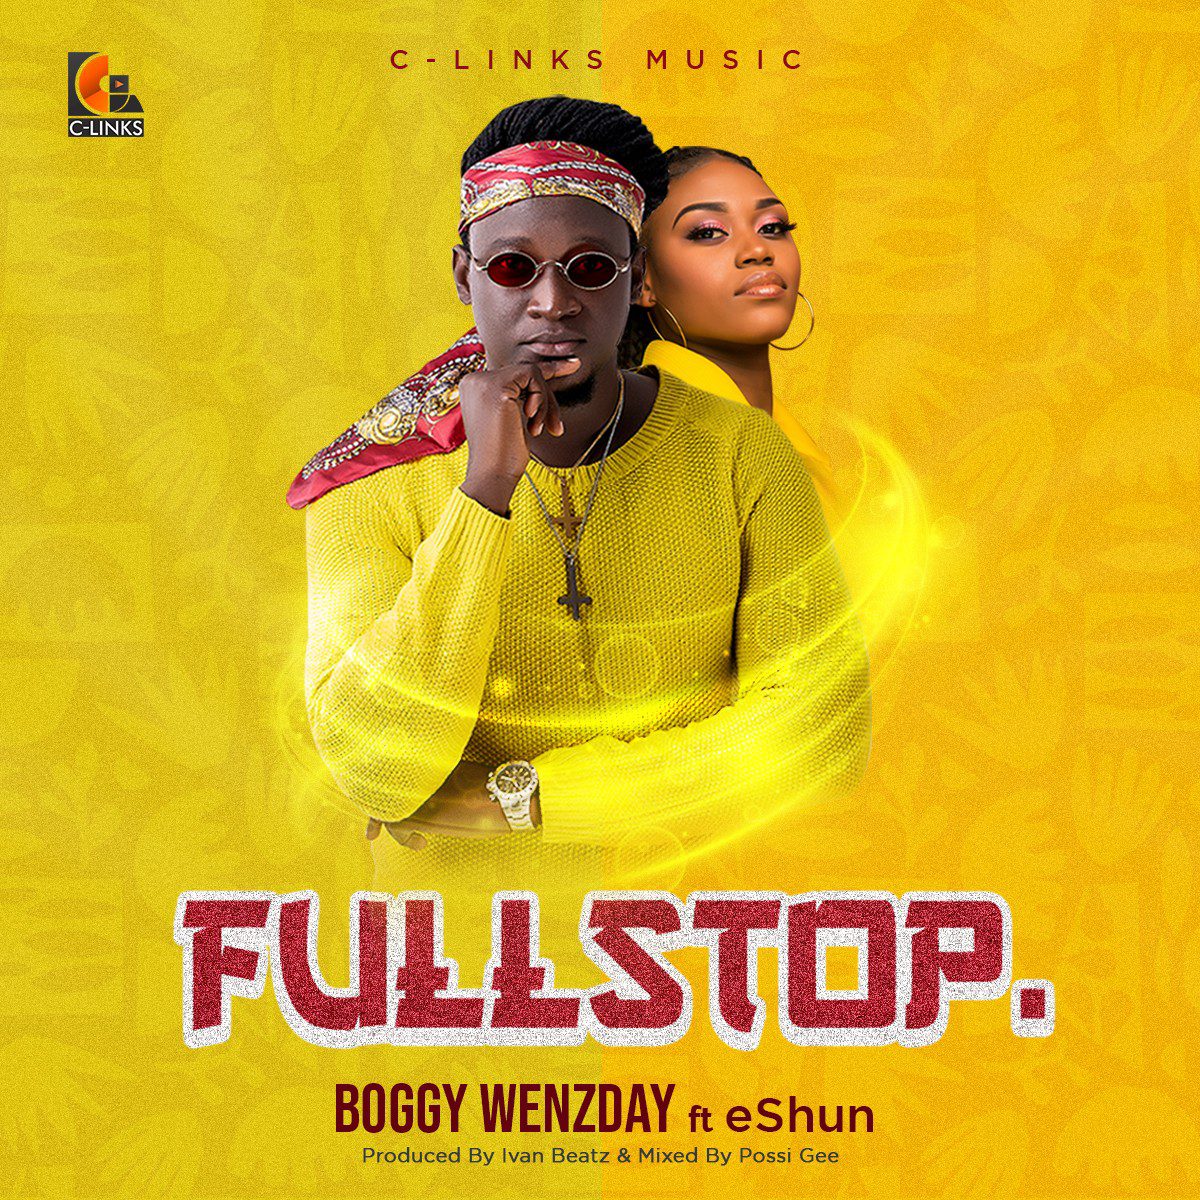 Boggy Wenzday ft. eShun – Full Stop (Prod. By IvanBeat & Mixed By Posigee)